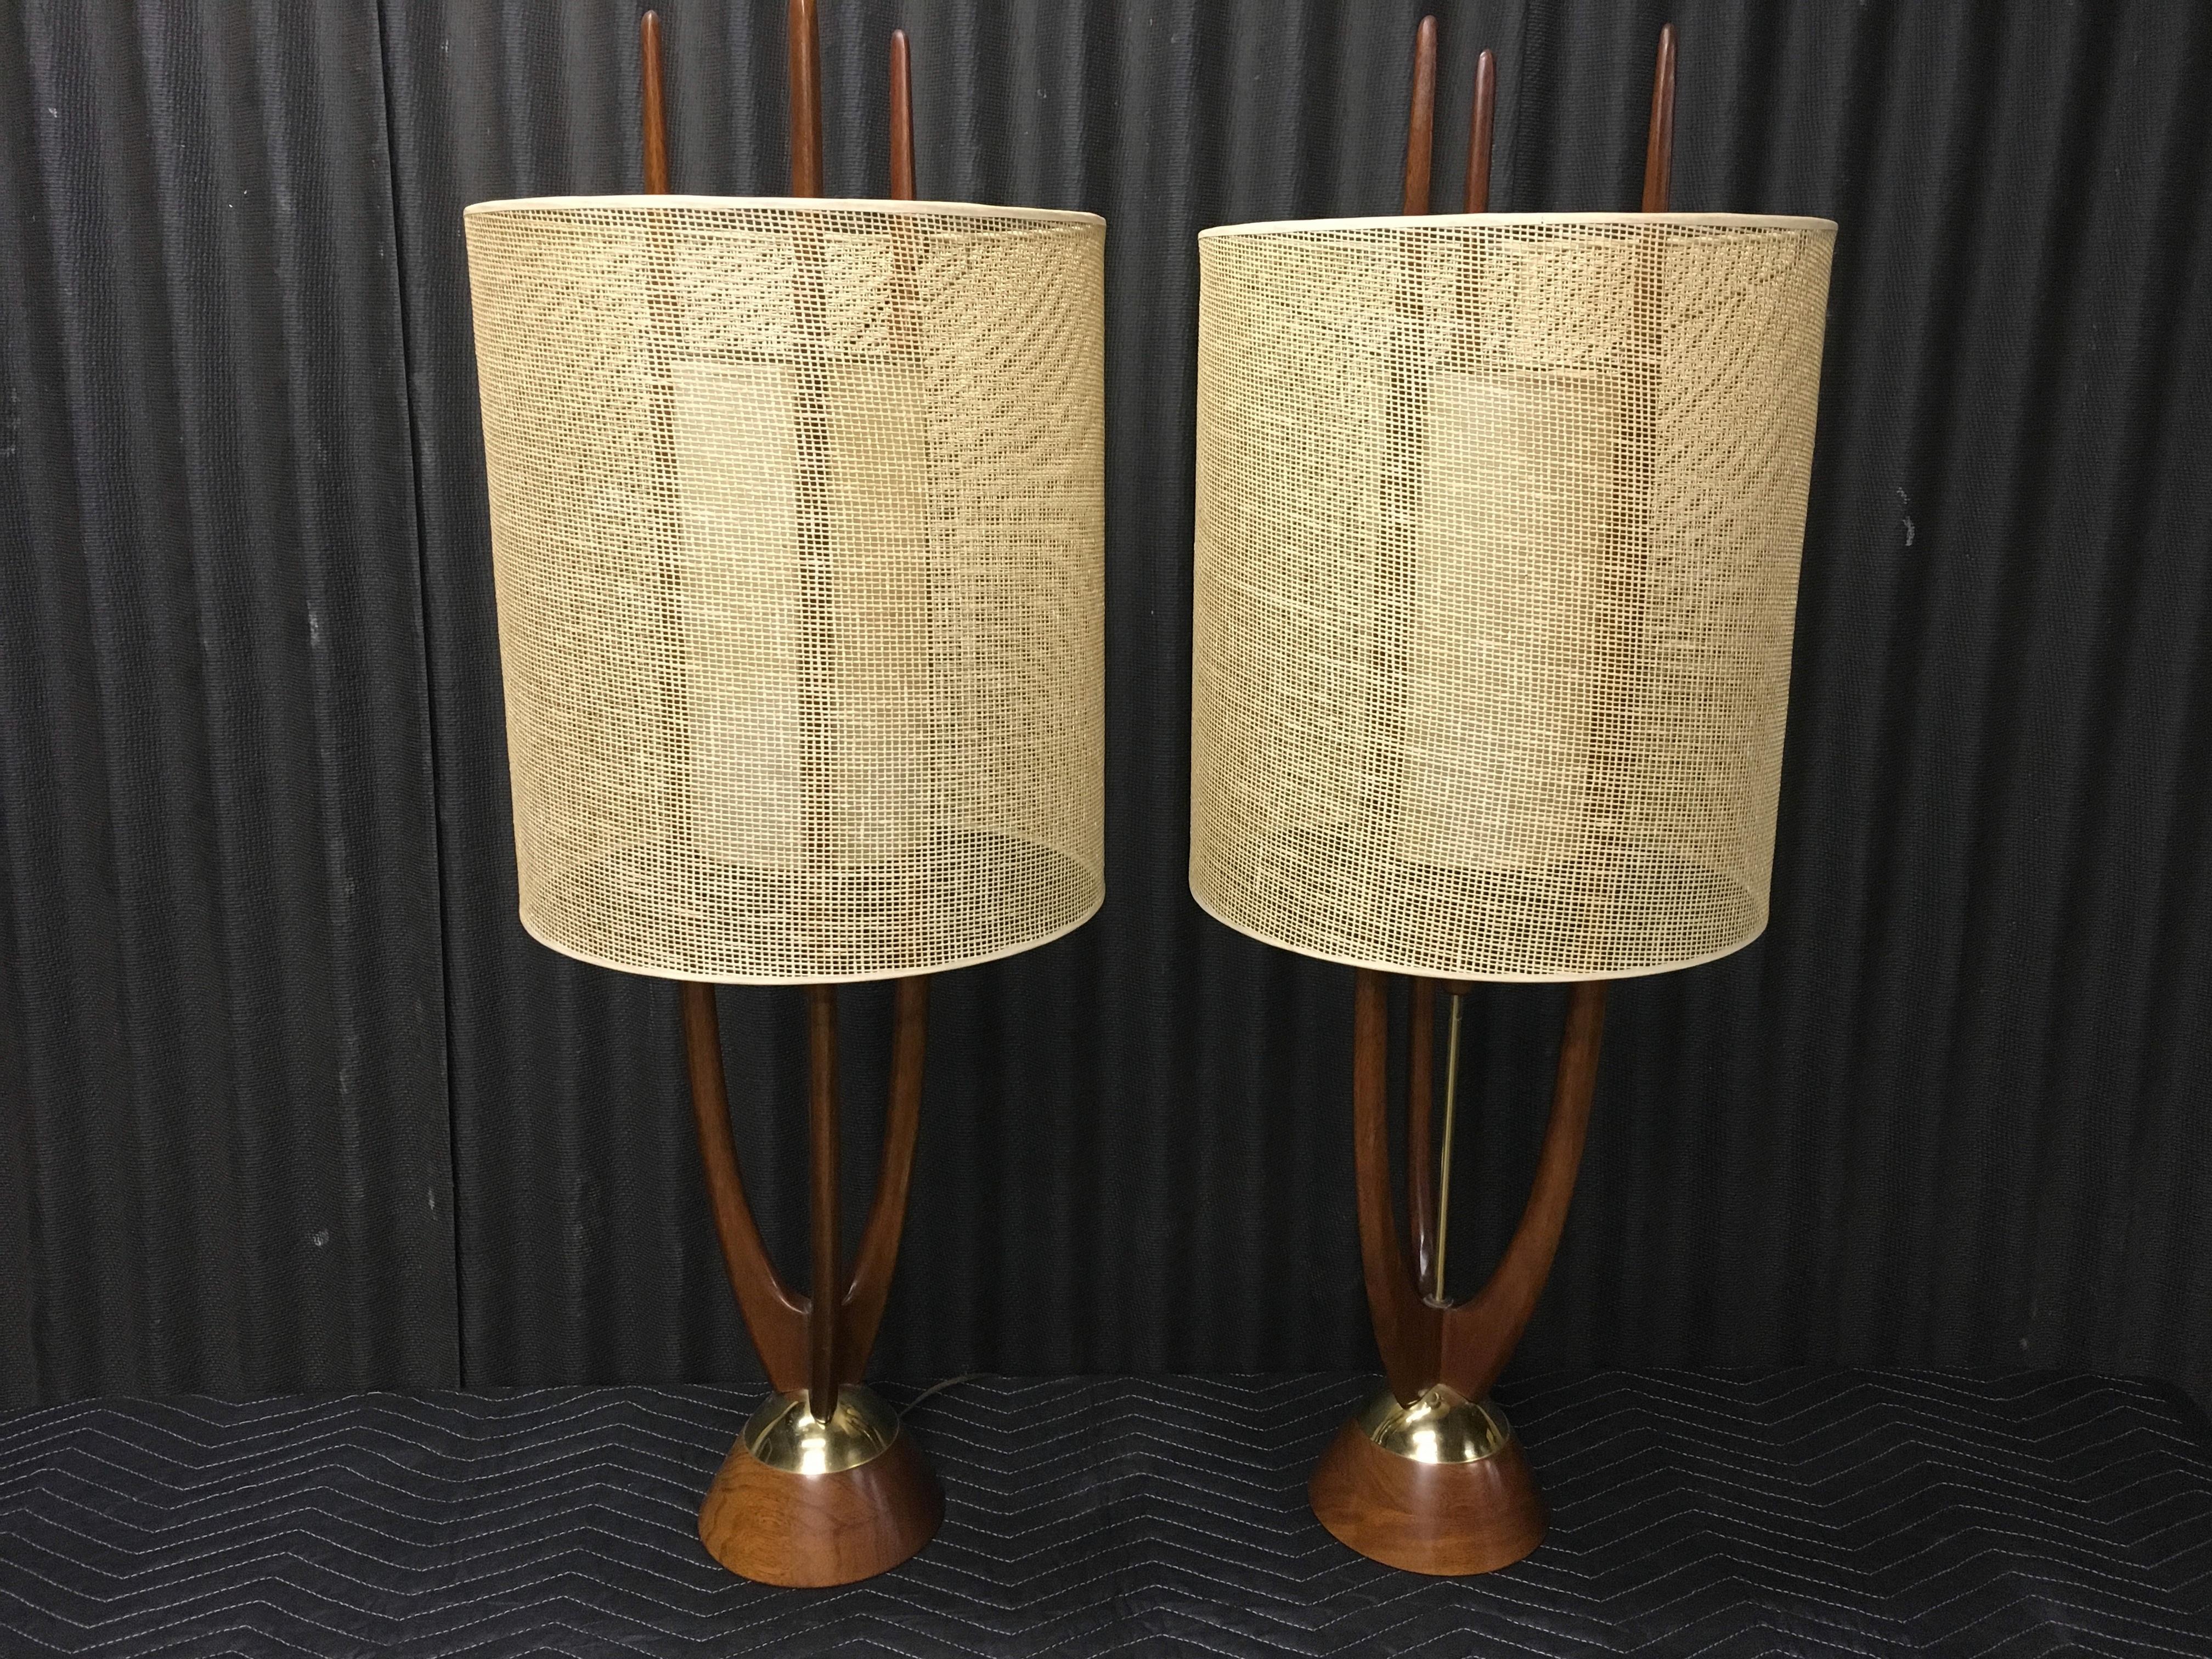 Exquisite Pair of Lamps by Modeline 13